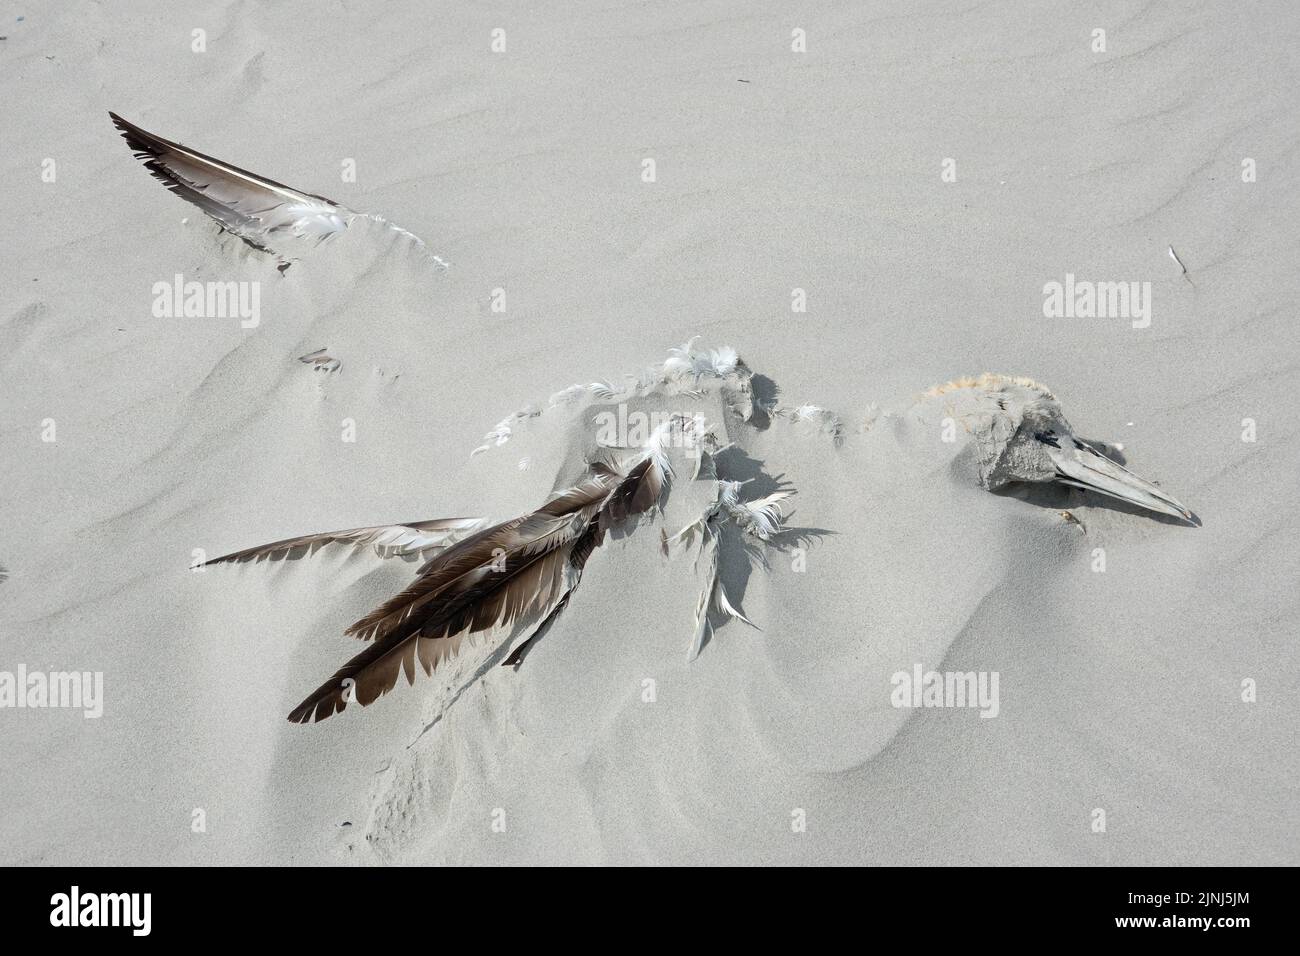 Dead Northern gannet, probably victim of avian influenza, washed up on the beach and partially buried under the sand Stock Photo